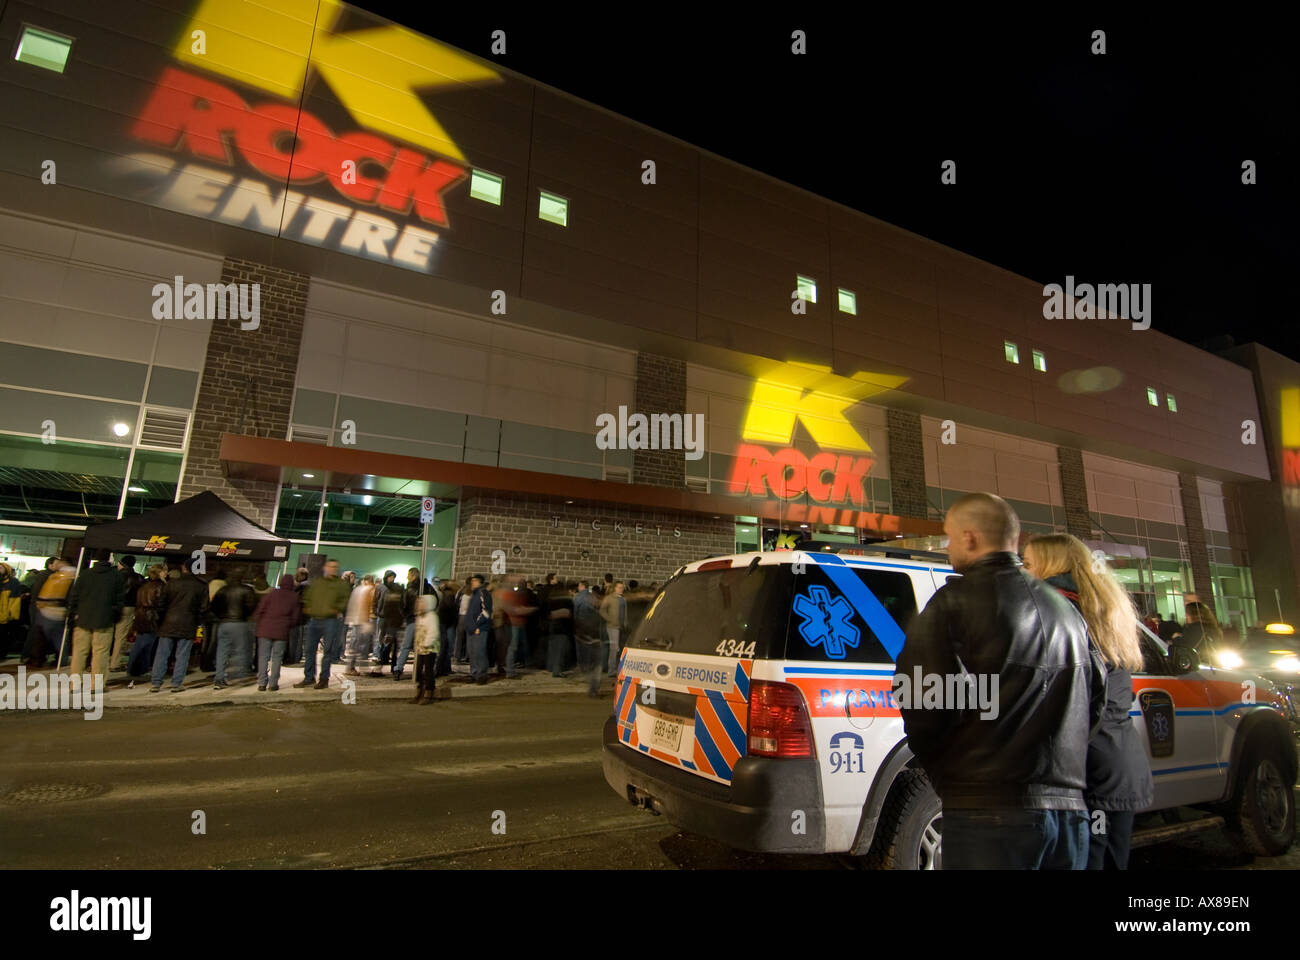 A crowd gathers outside the new K Rock Centre for the Tragically Hip concert on Feb 23rd 2008 Stock Photo